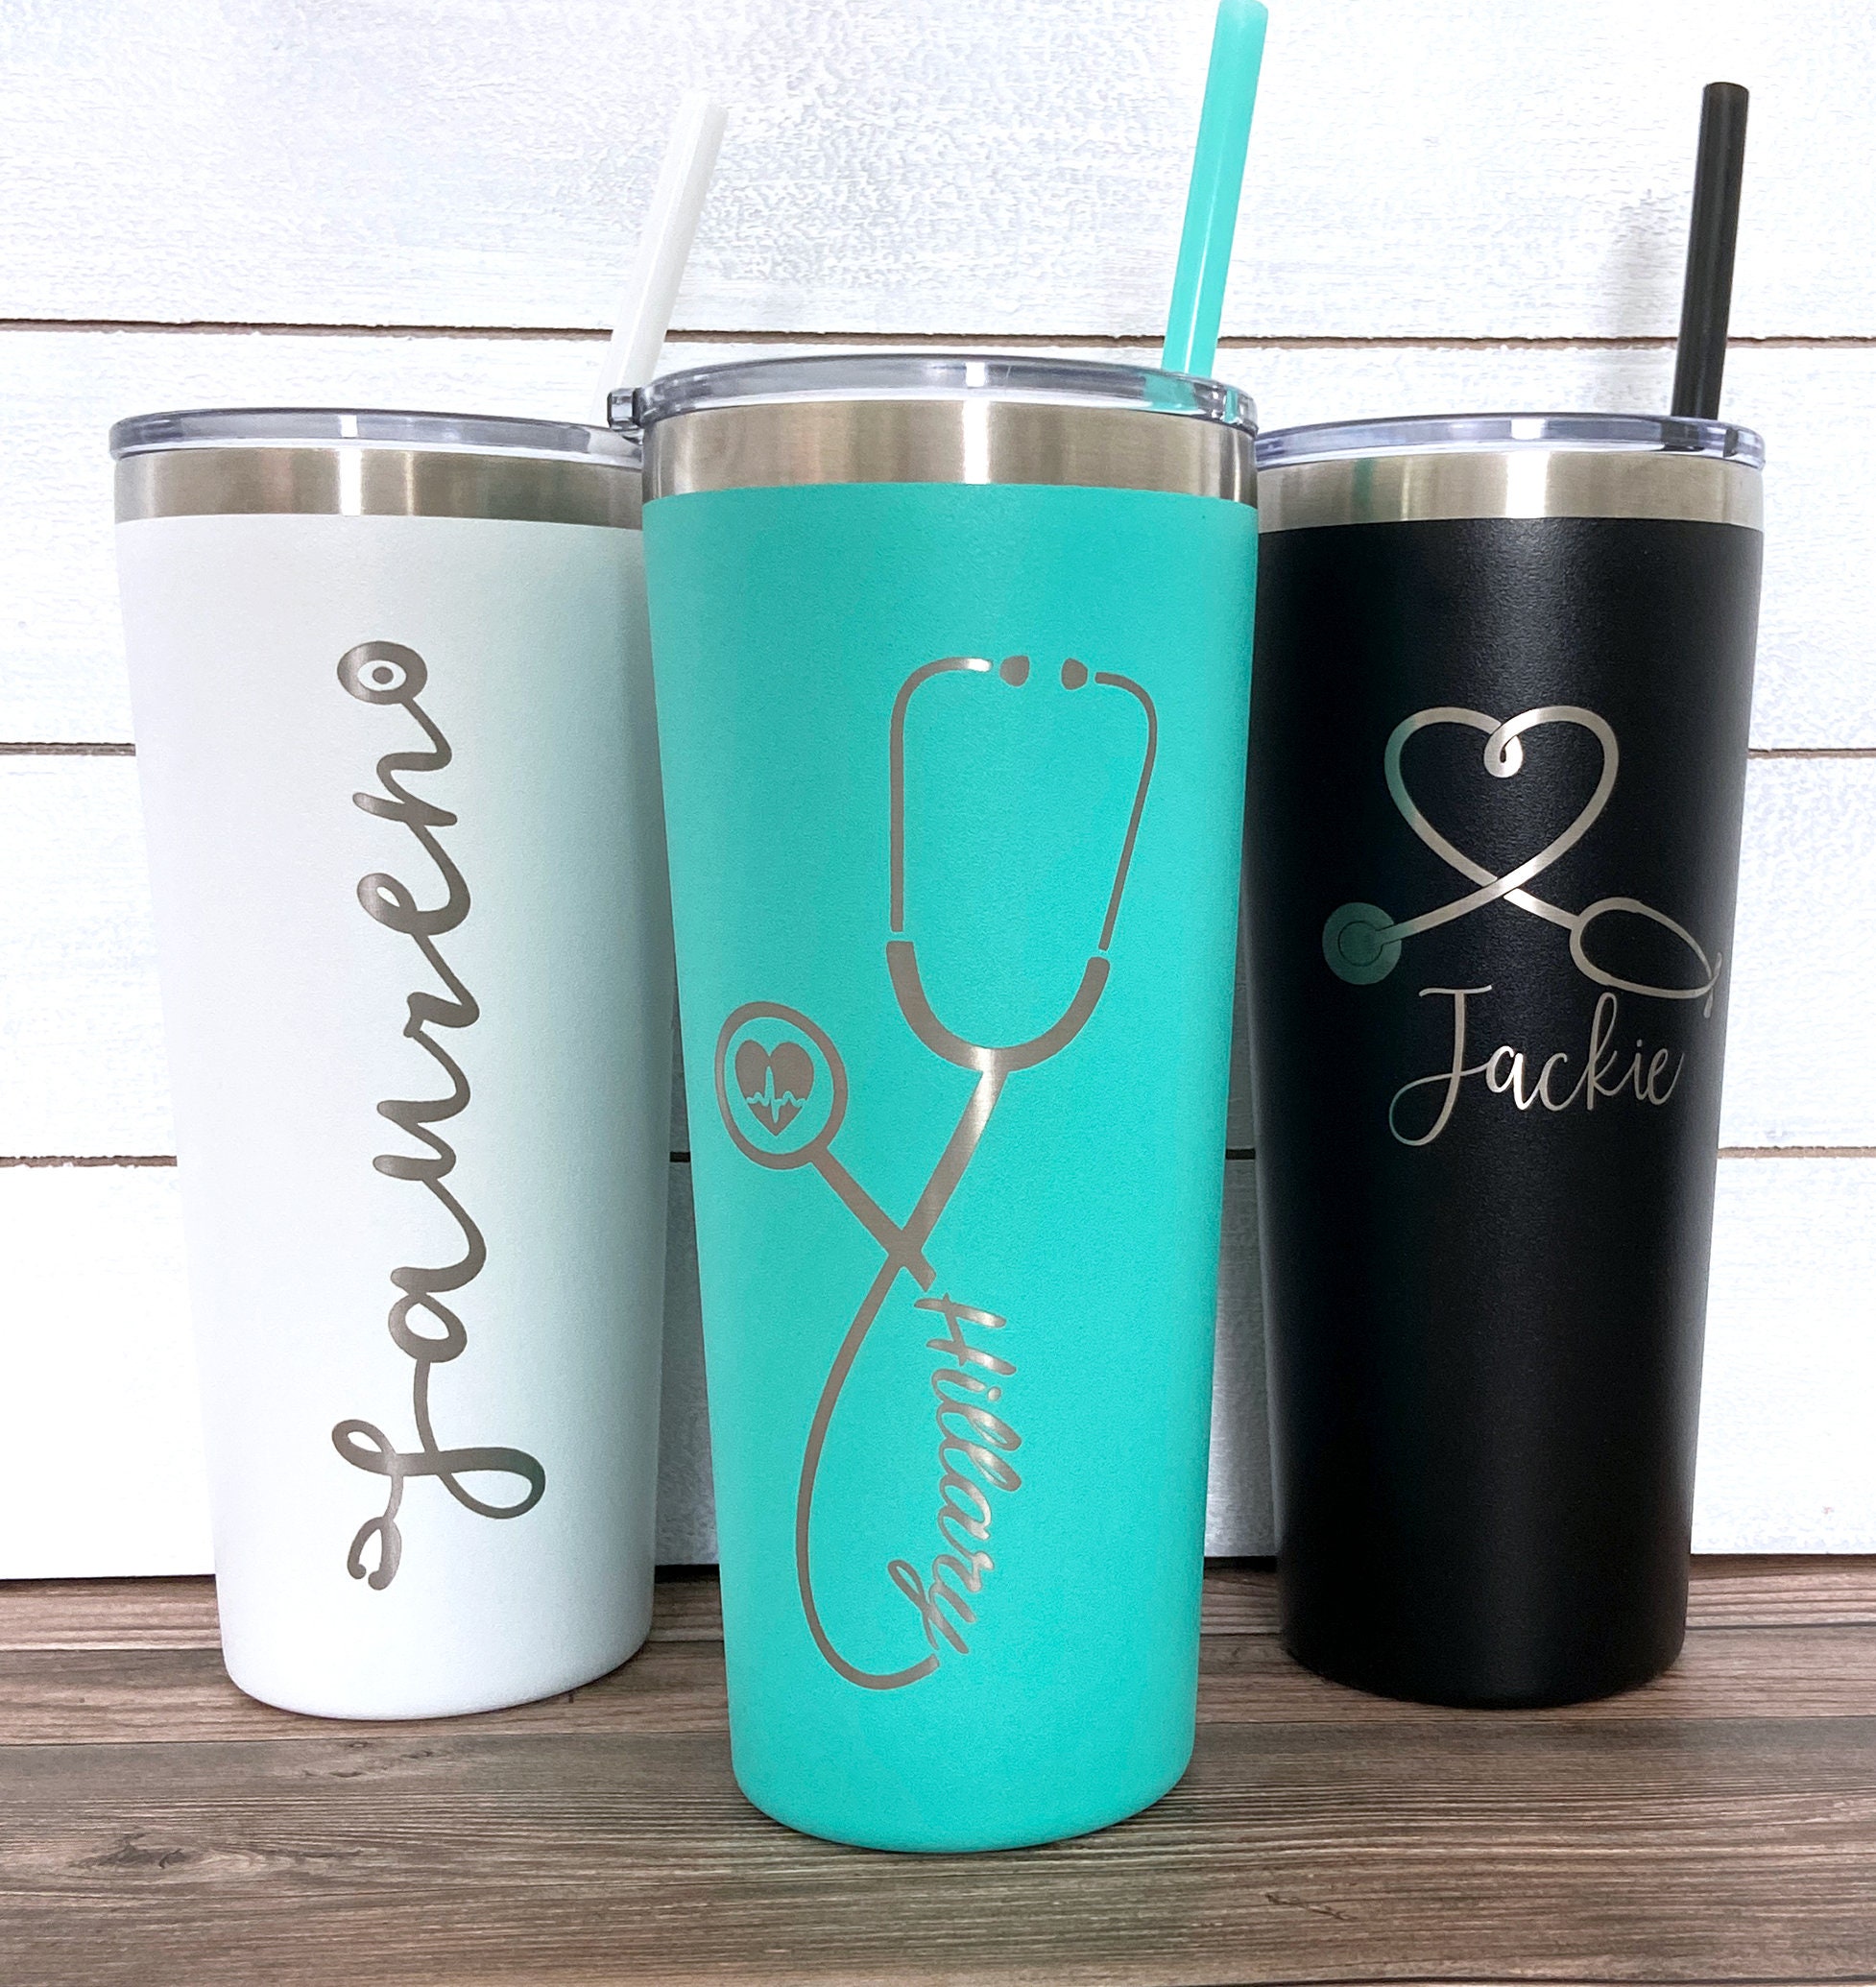 You Are My Person - Nurse Version - Personalized Acrylic Tumbler